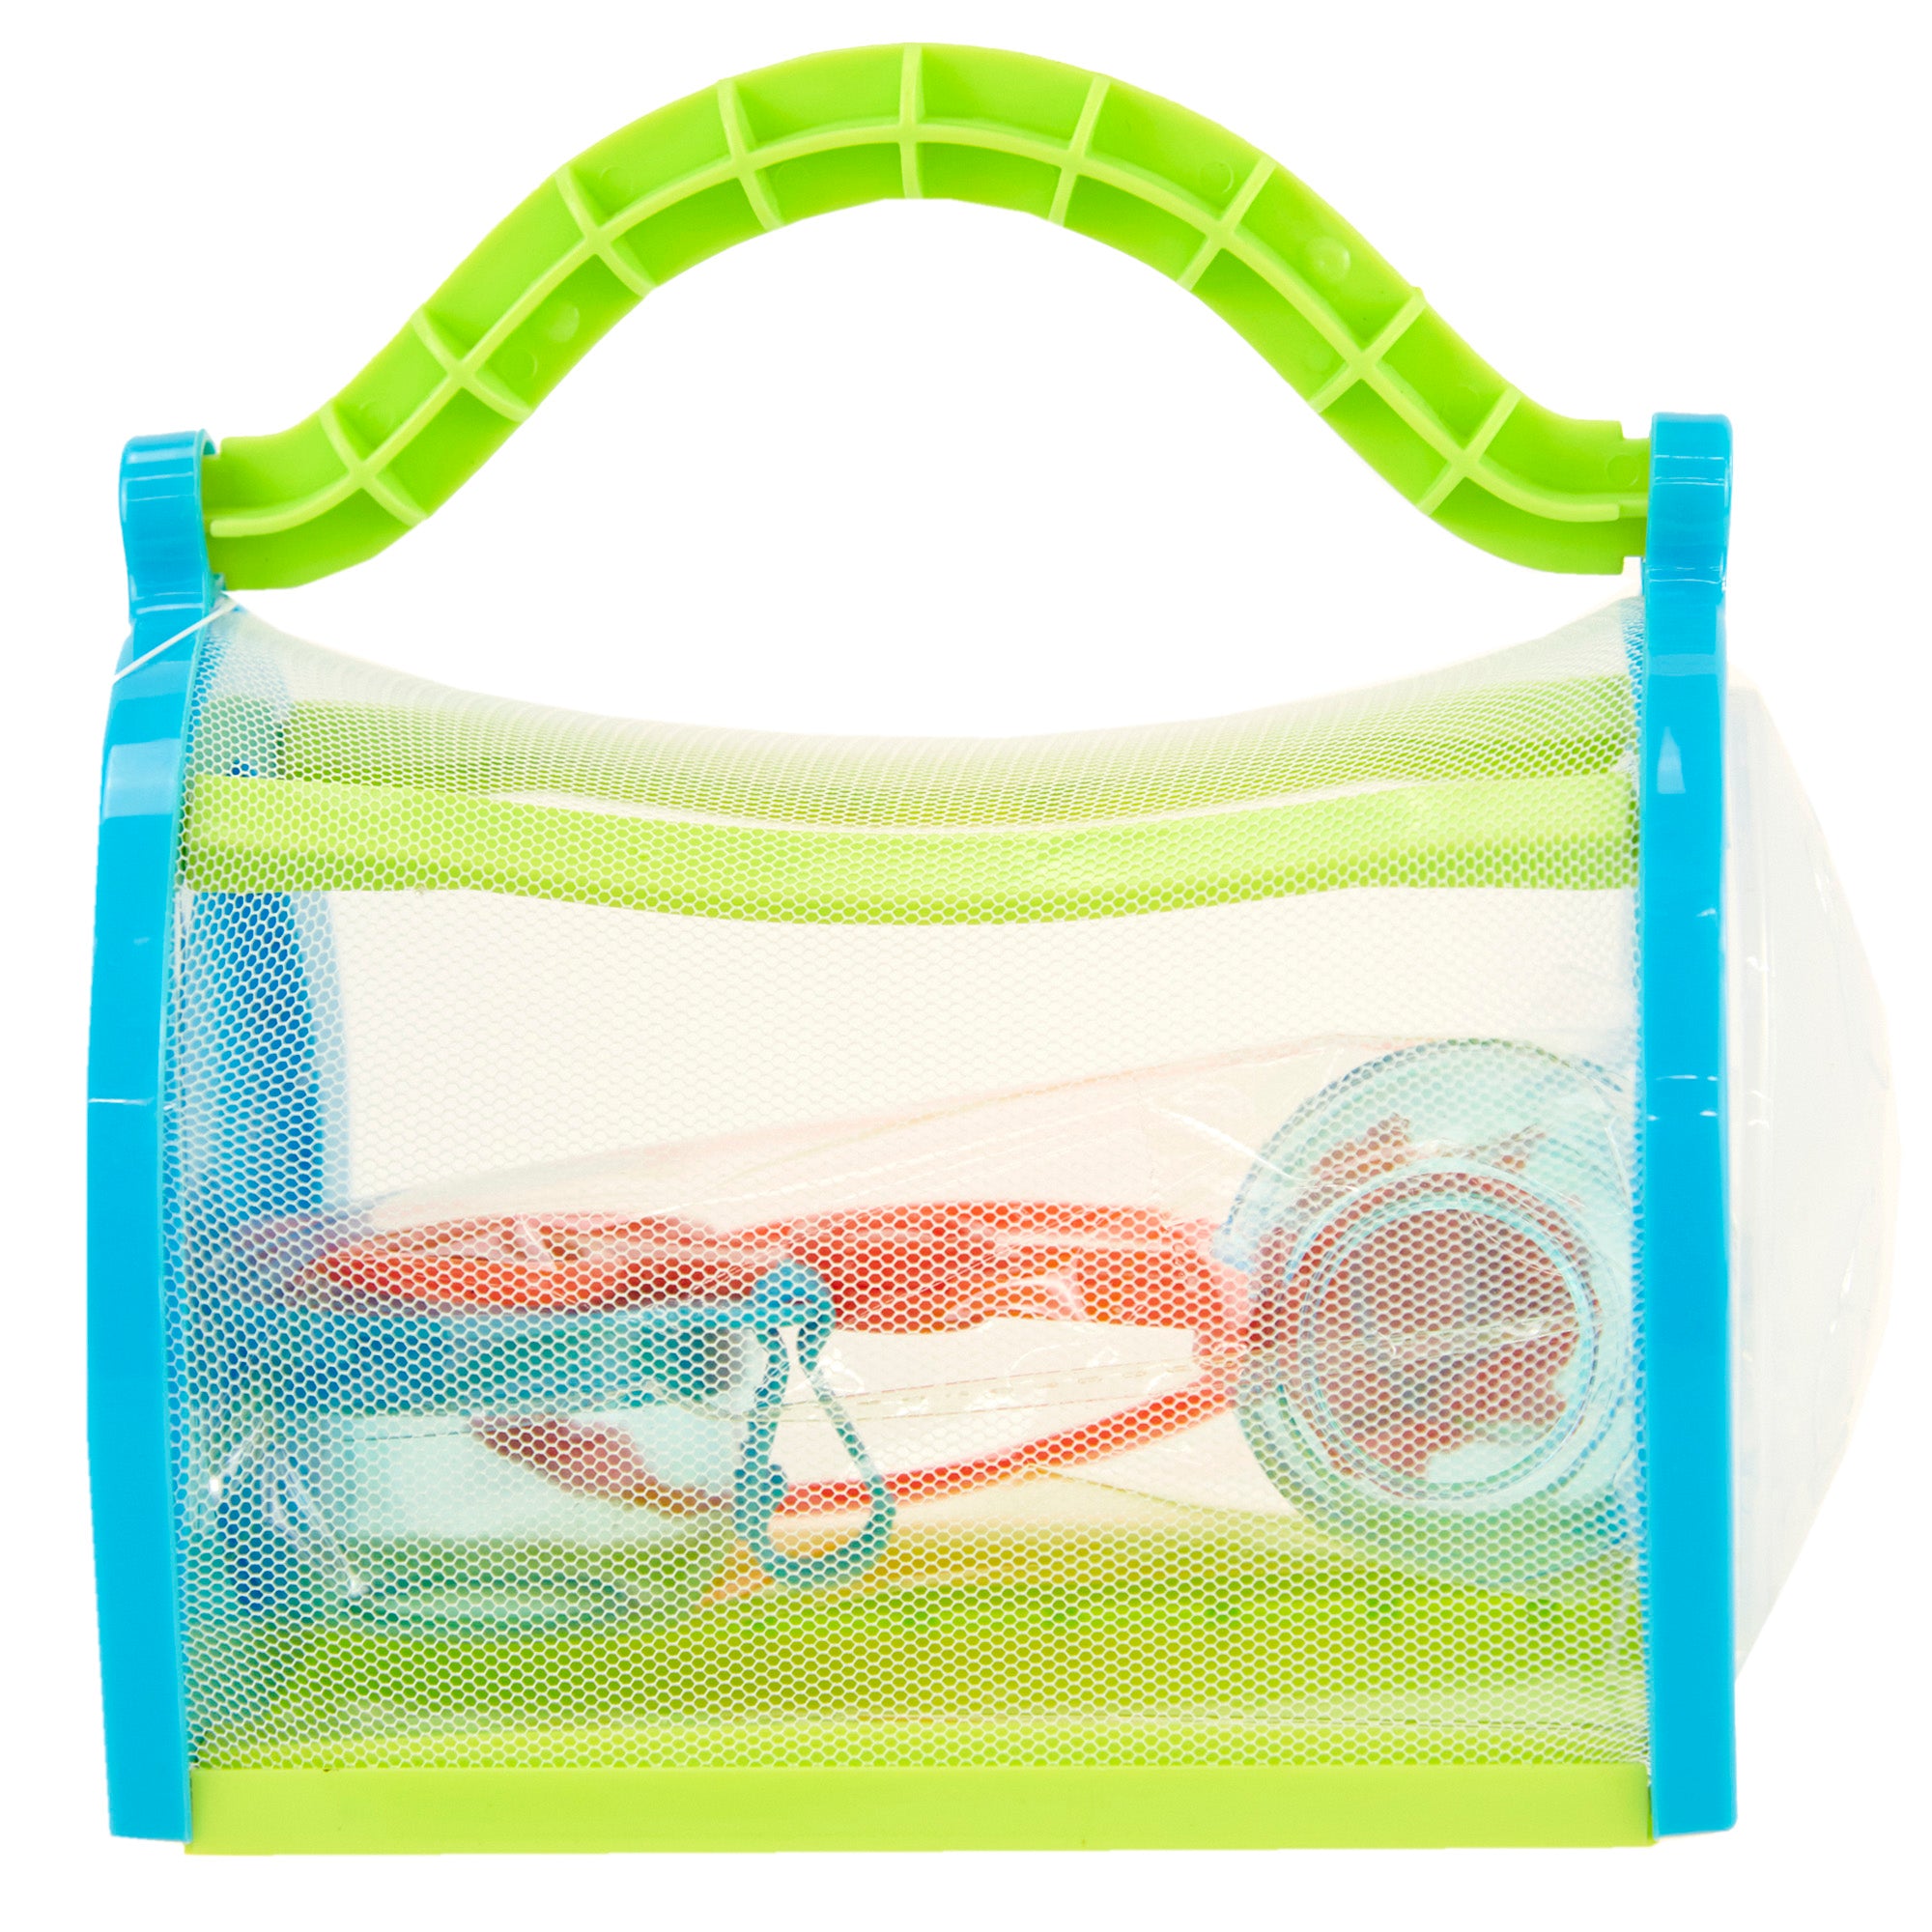 Catcher Kids Net Catching Cage Outdoor Fishing Container Critter